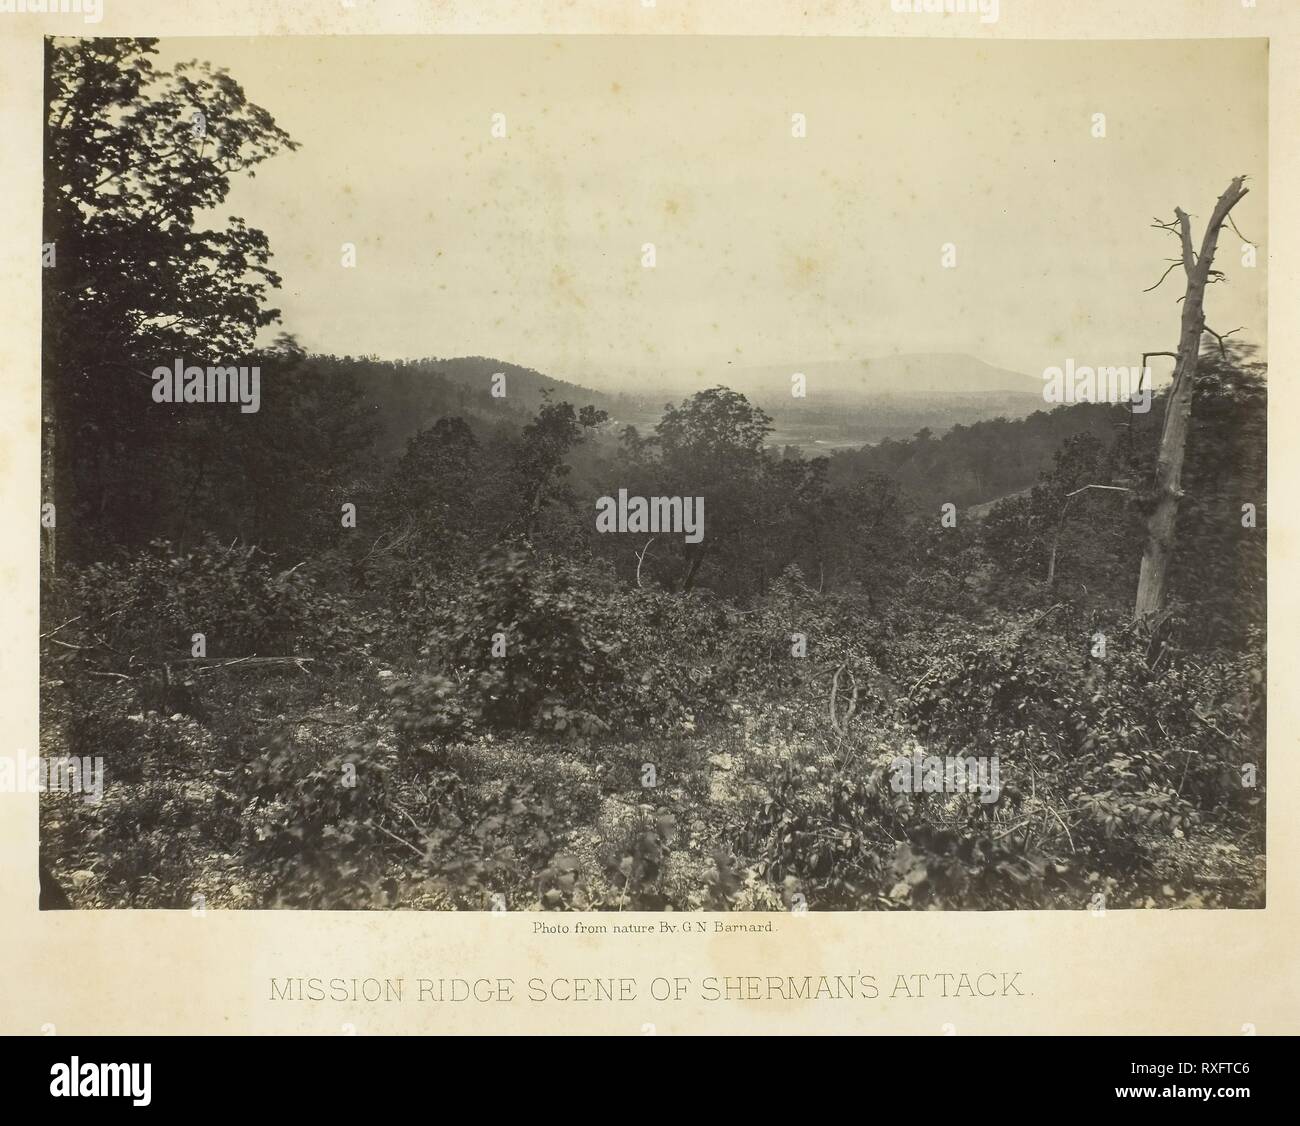 Mission Ridge Scene of Sherman's Attack. George N. Barnard; American, 1819-1902. Date: 1864-1866. Dimensions: 25.6 x 36 cm (image/paper); 40.9 x 50.8 cm (album page). Albumen print, plate 12 from the album 'Photographic Views of the Sherman Campaign' (1866). Origin: United States. Museum: The Chicago Art Institute. Stock Photo